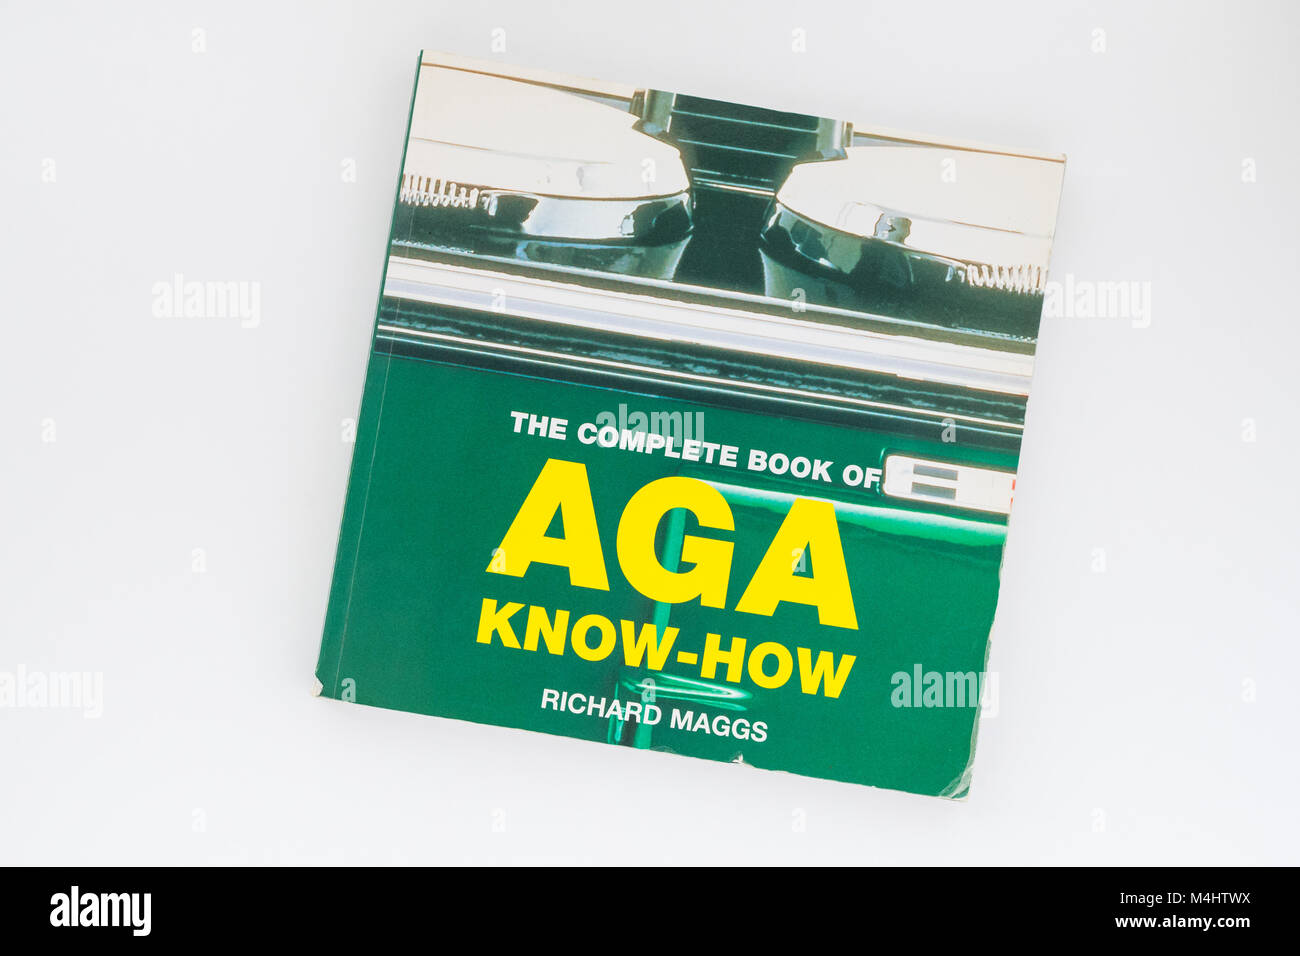 The Complete Book of Aga Know-how by Richard Maggs Stock Photo